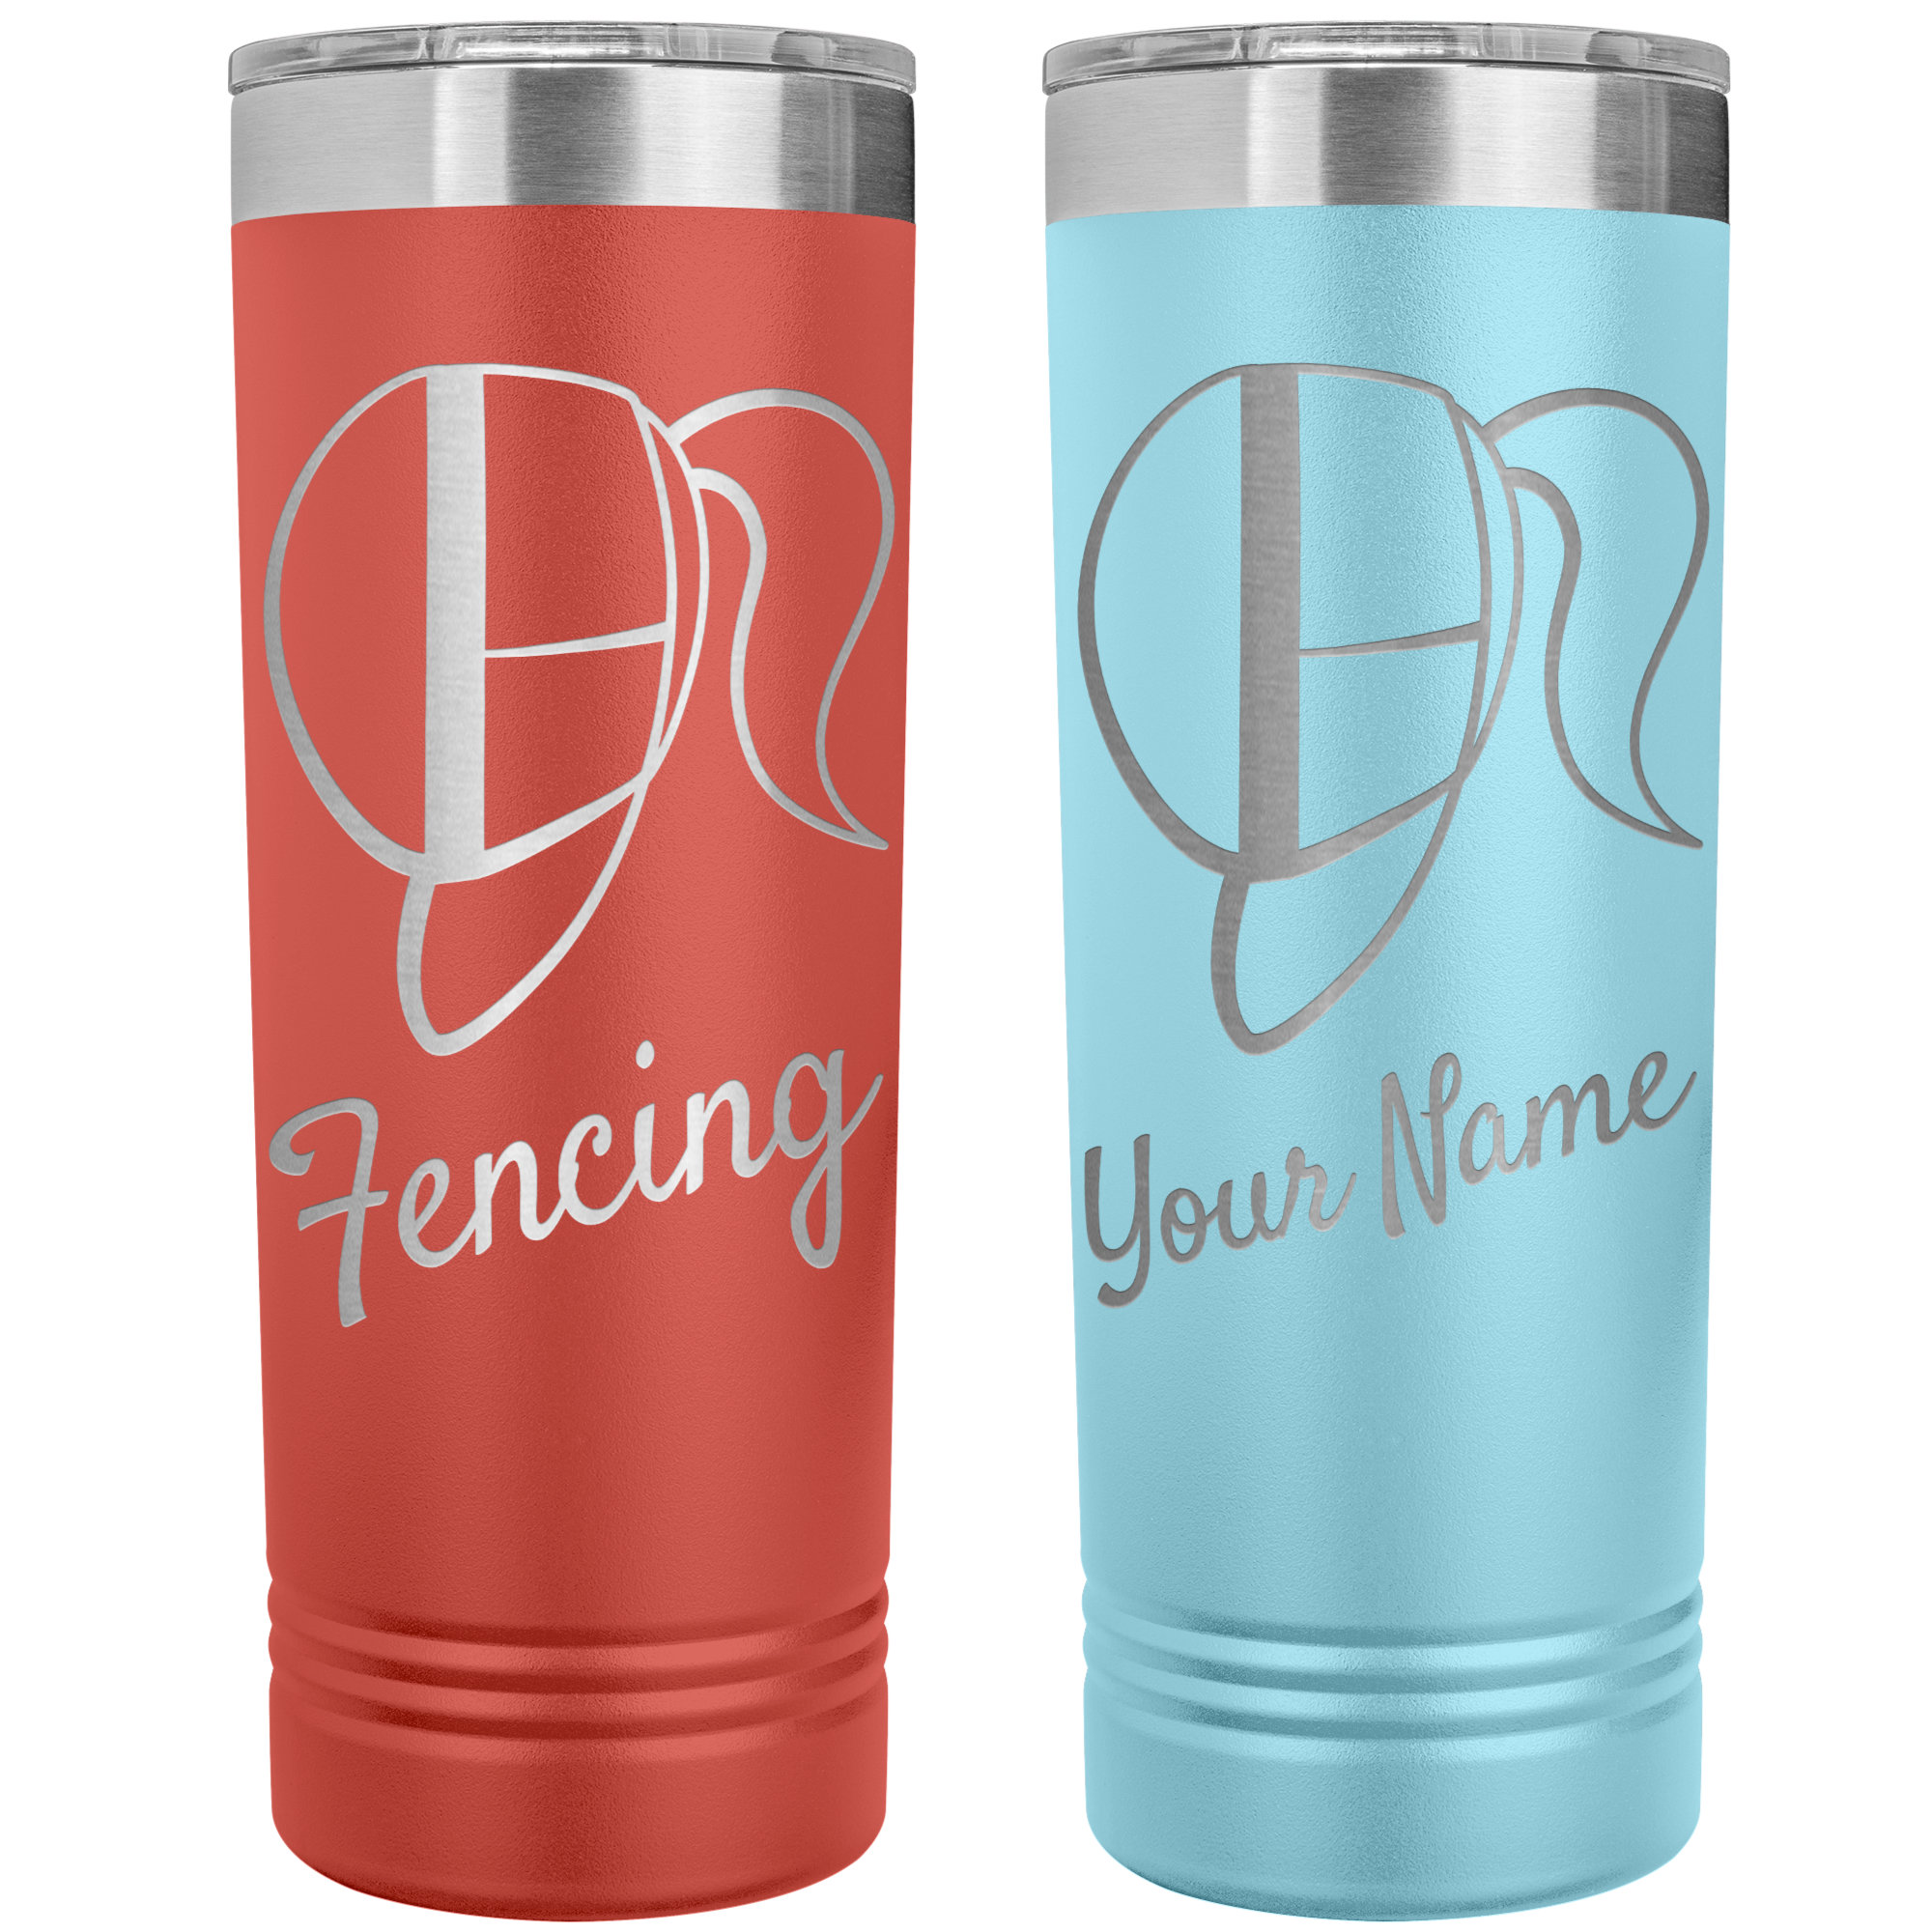 Girly Fencing Tumbler - Fencing Love